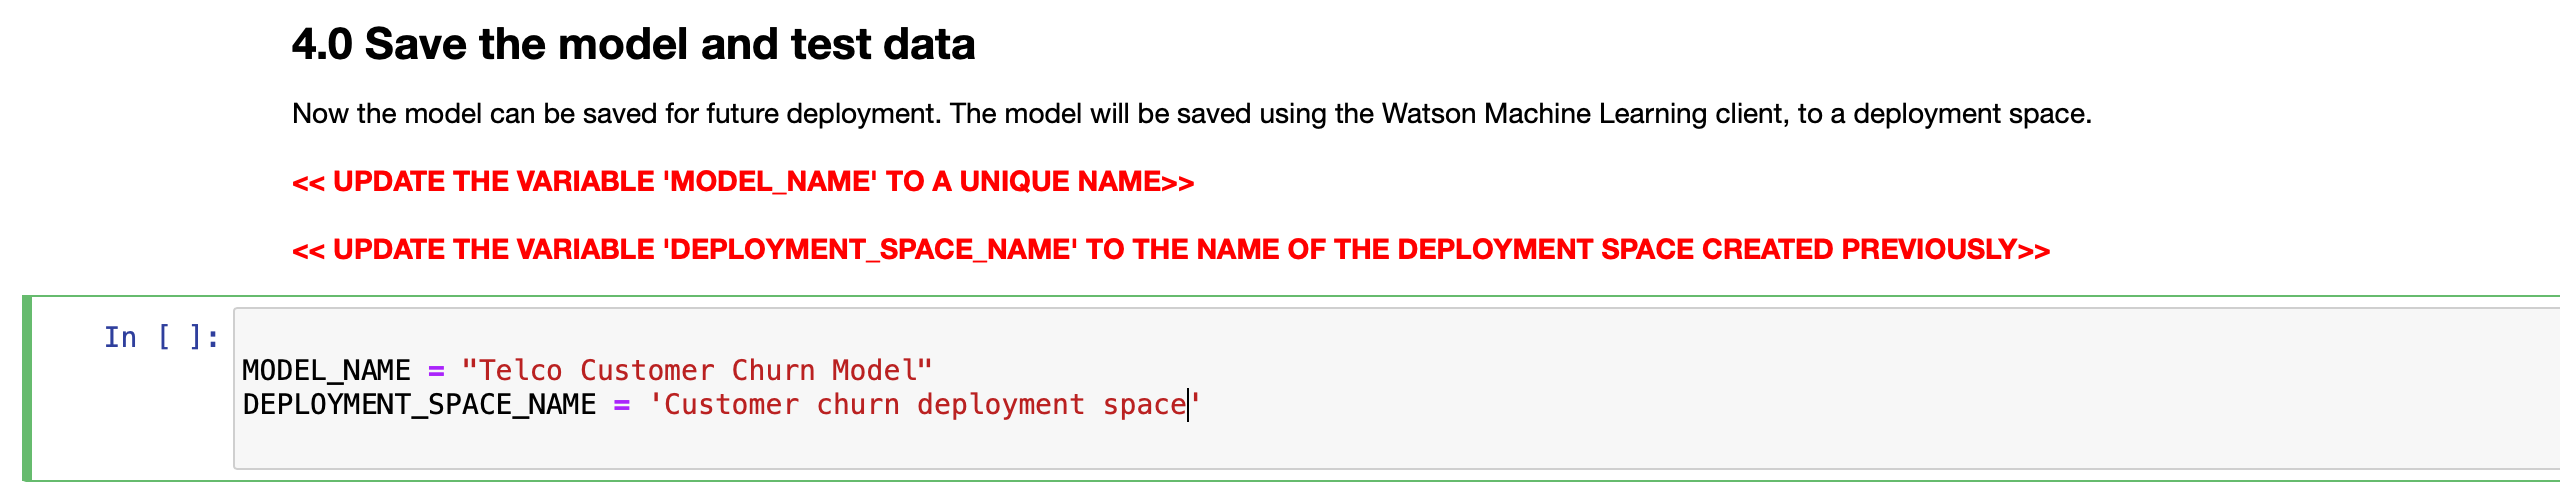 Provide model and deployment space name